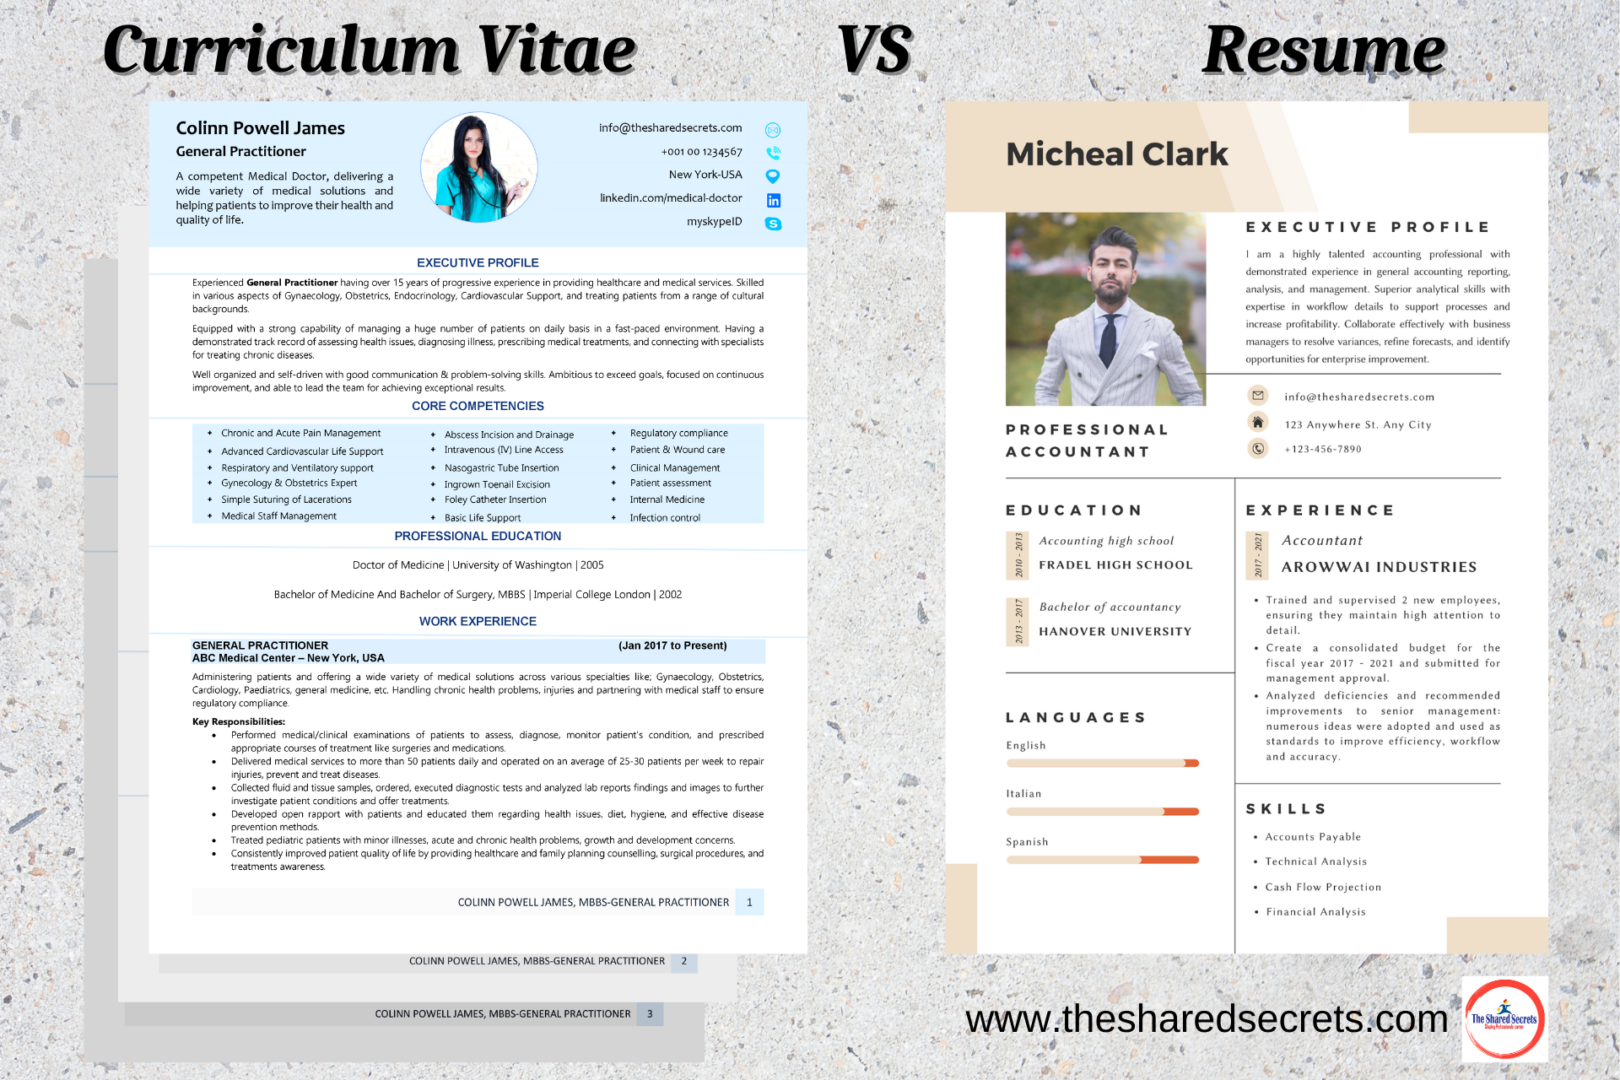 What are the differences between a resume and a CV? | The Shared Secrets